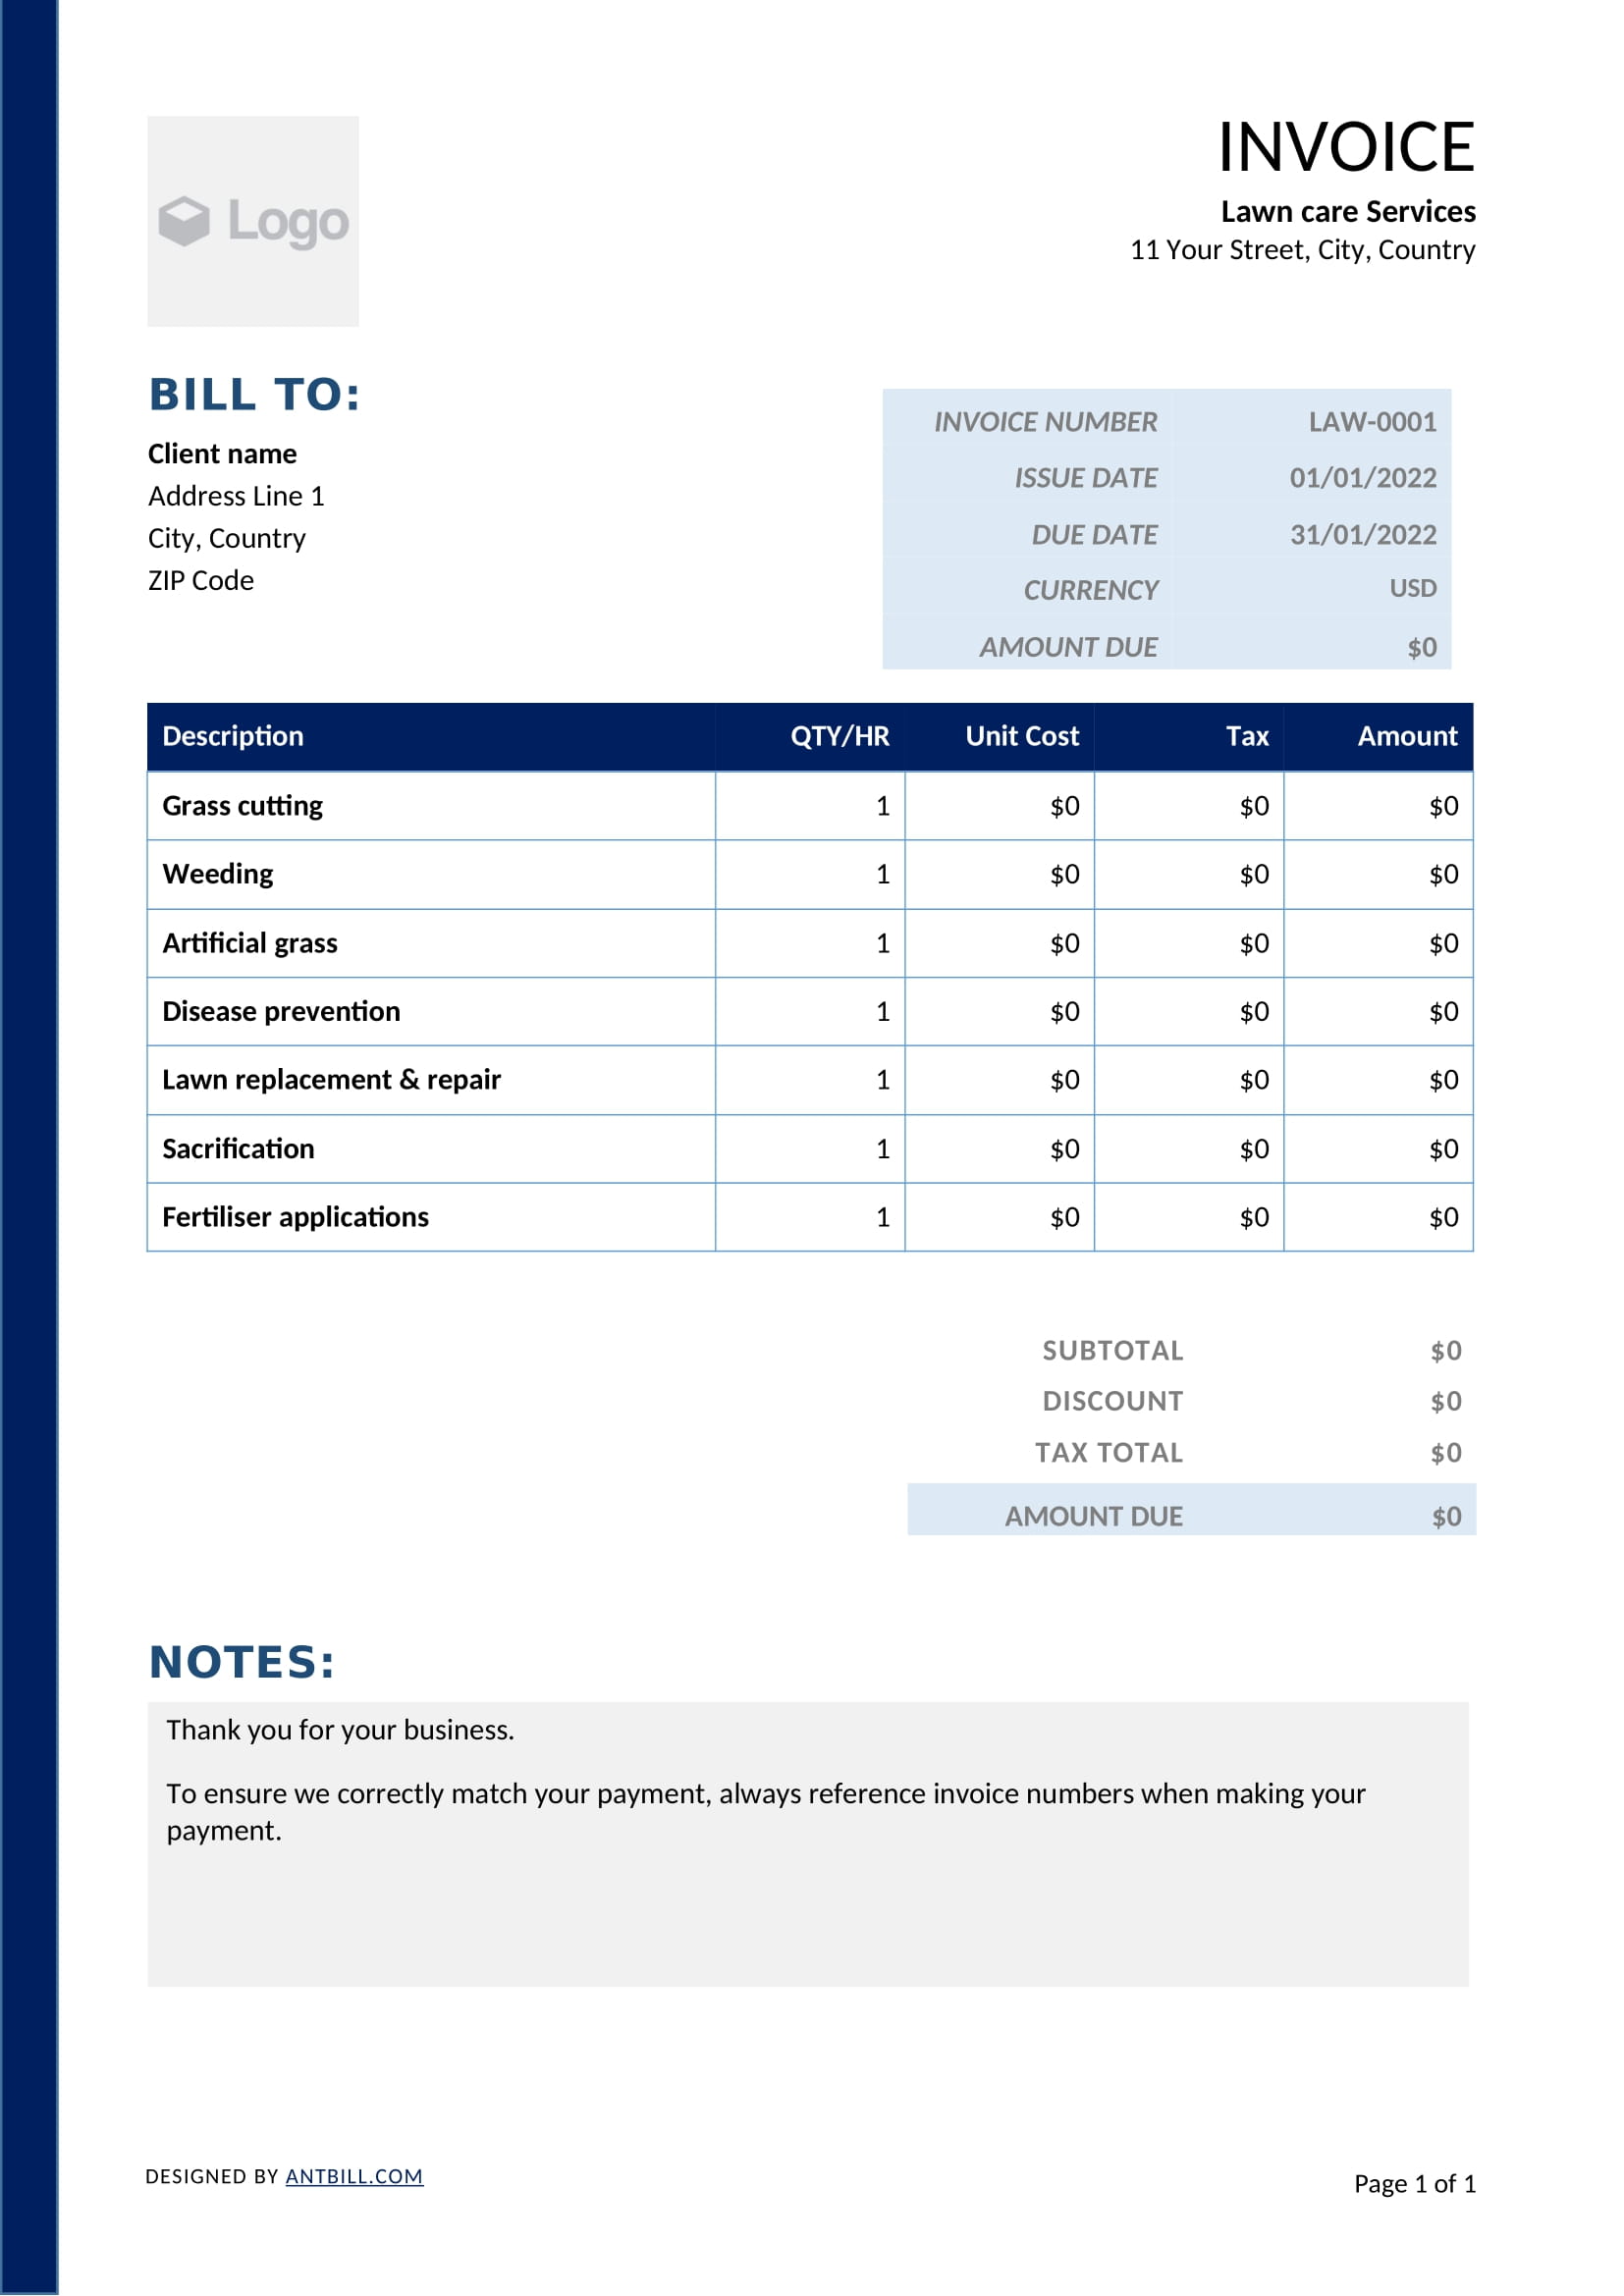 Lawn Care Services Invoice Template - professional